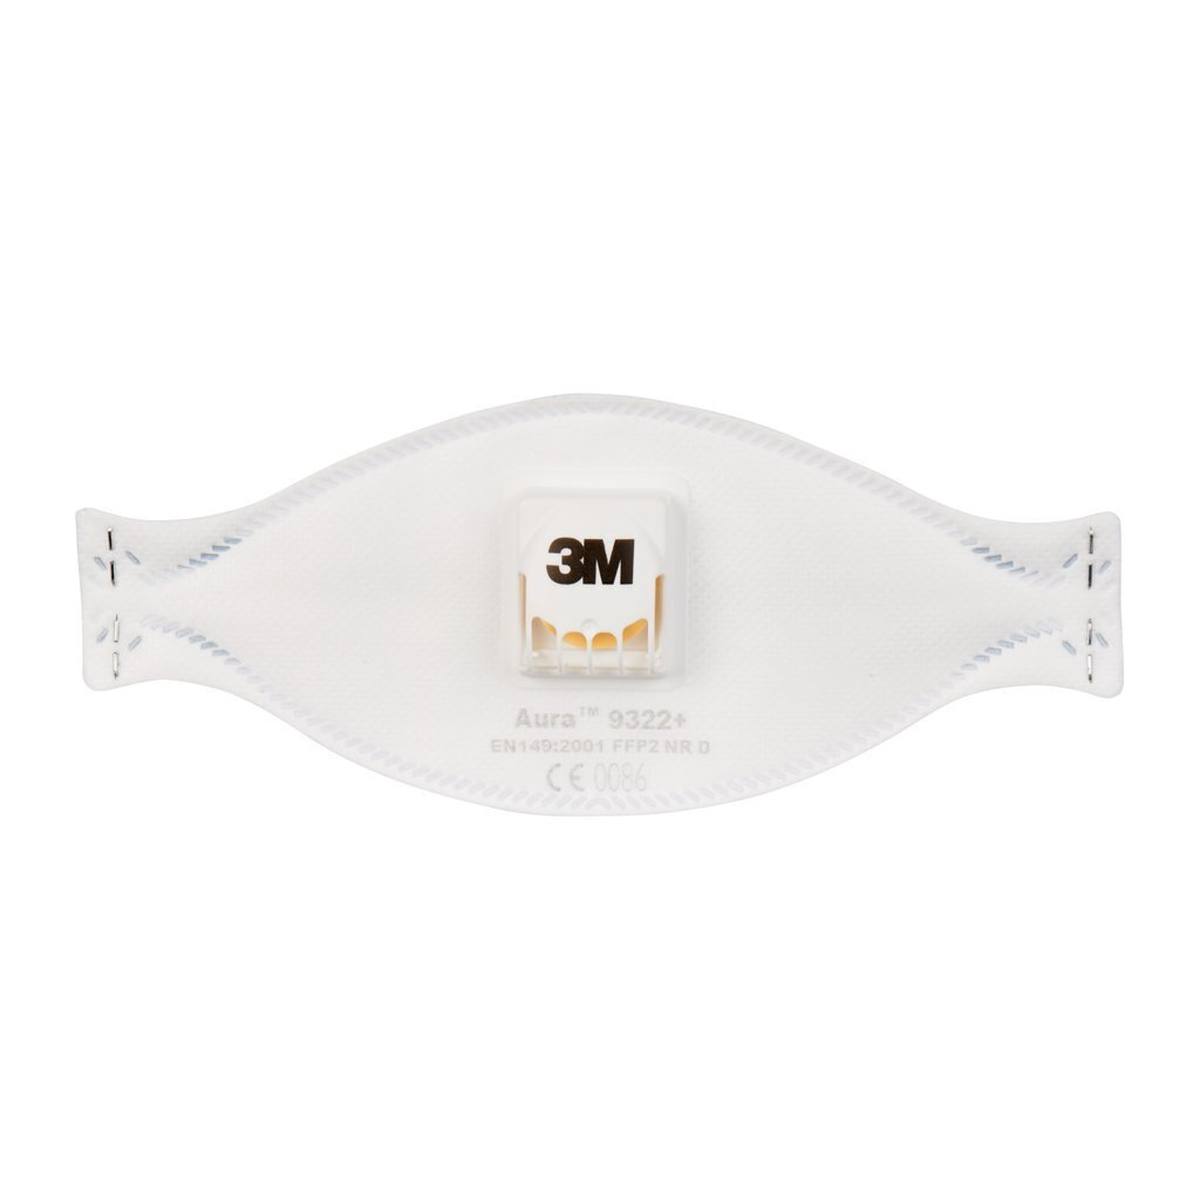 3M 9322+ Aura respirator FFP2 with cool-flow exhalation valve, up to 10 times the limit value (hygienically individually packaged)